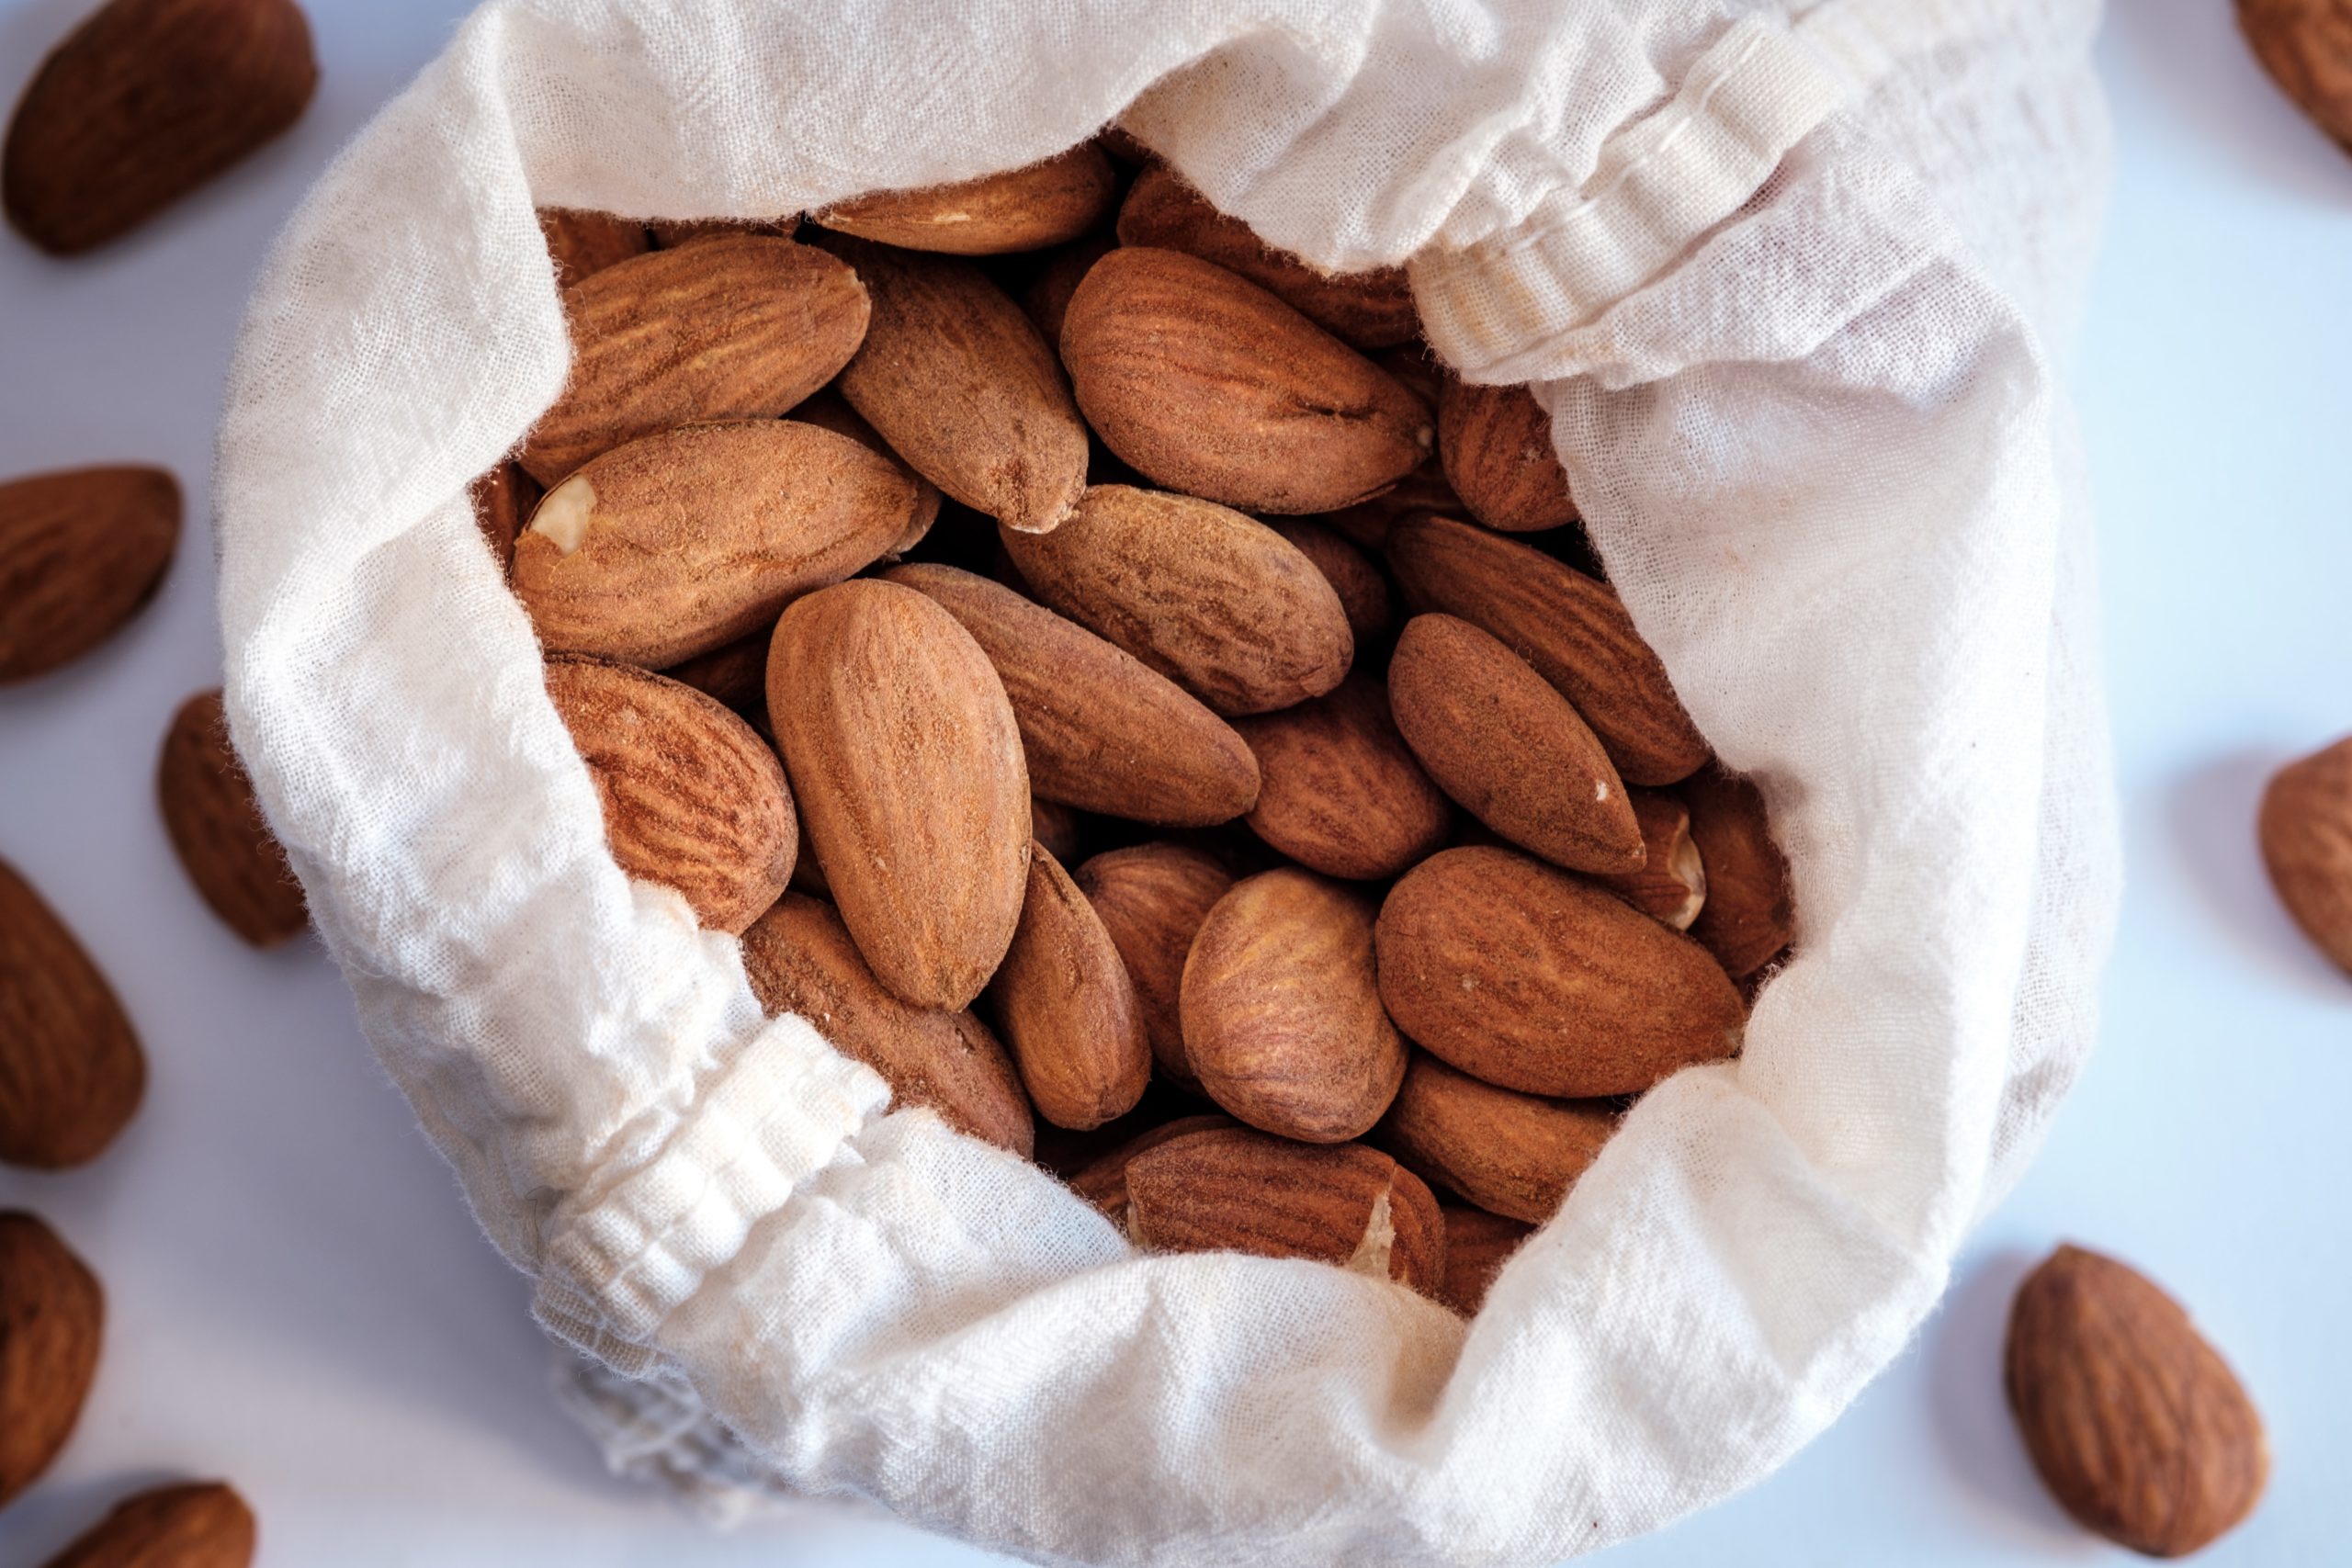 A bag of almonds. Almonds are a rich source of vitamin E, a micronutrients that our bodies need to stay healthy. Image from Unsplash.